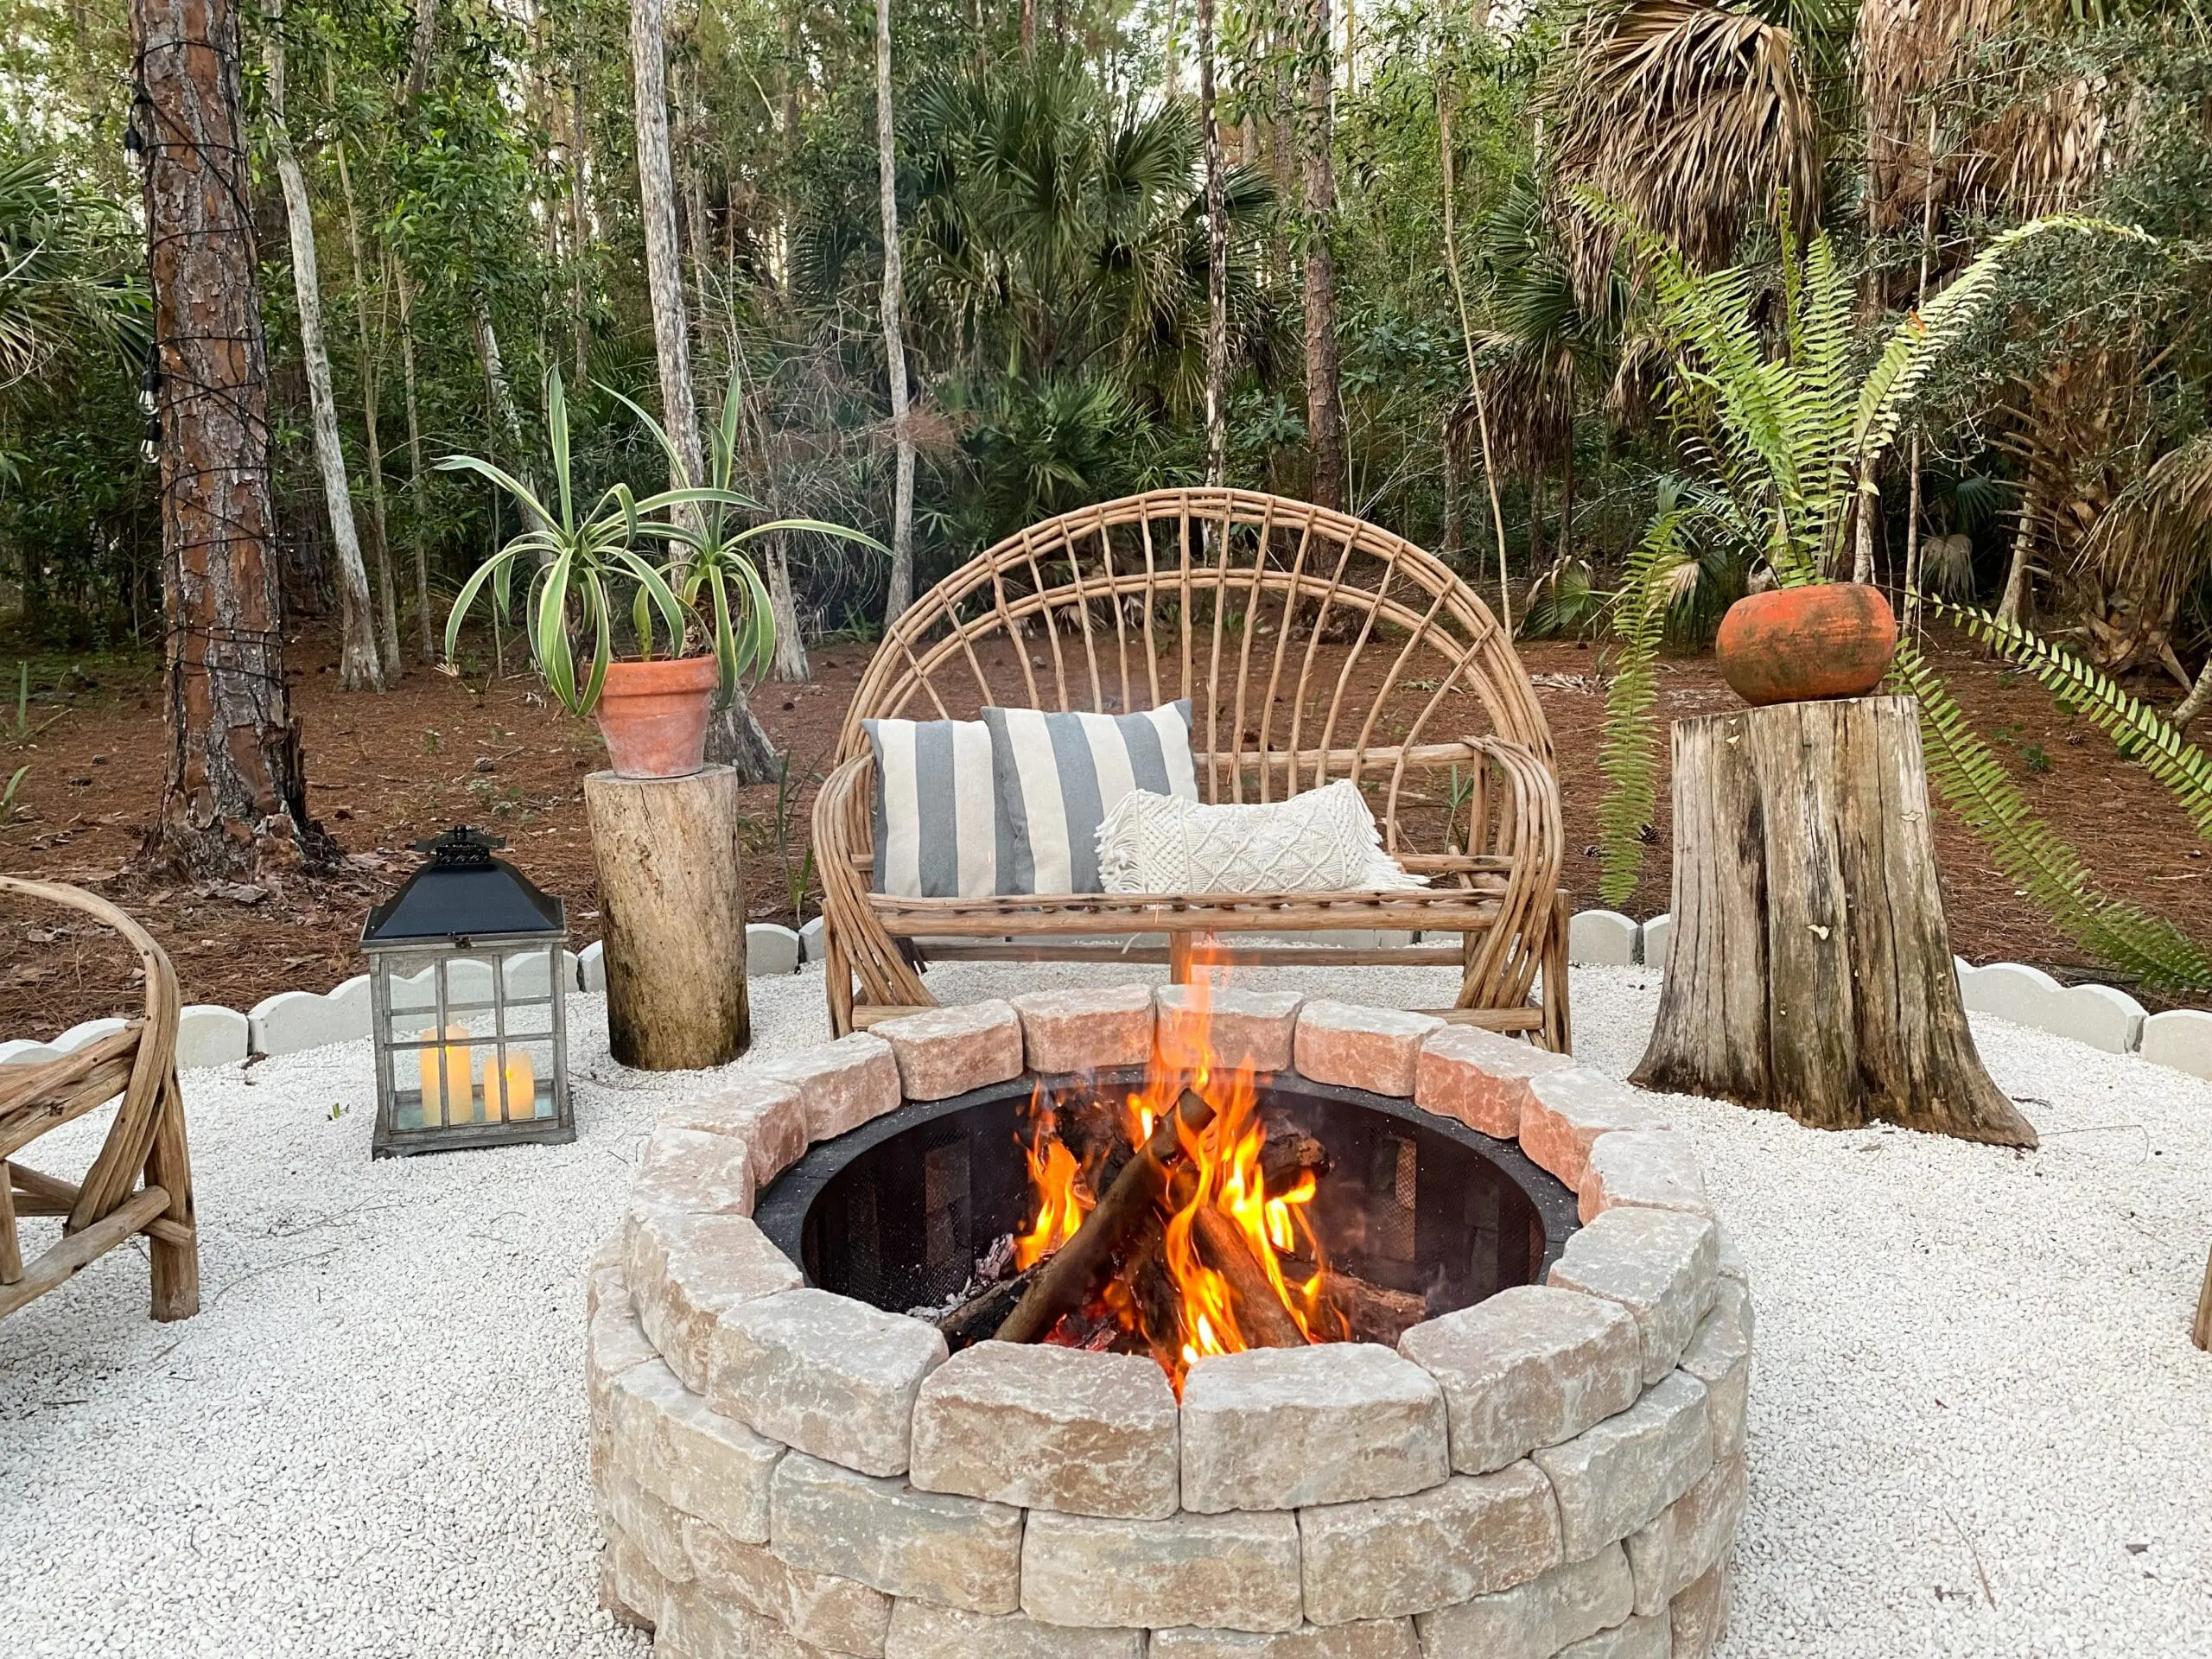 Fire,Pit,Bonfire,Campsite,In,Tropical,Backyard,Woods,With,Rustic